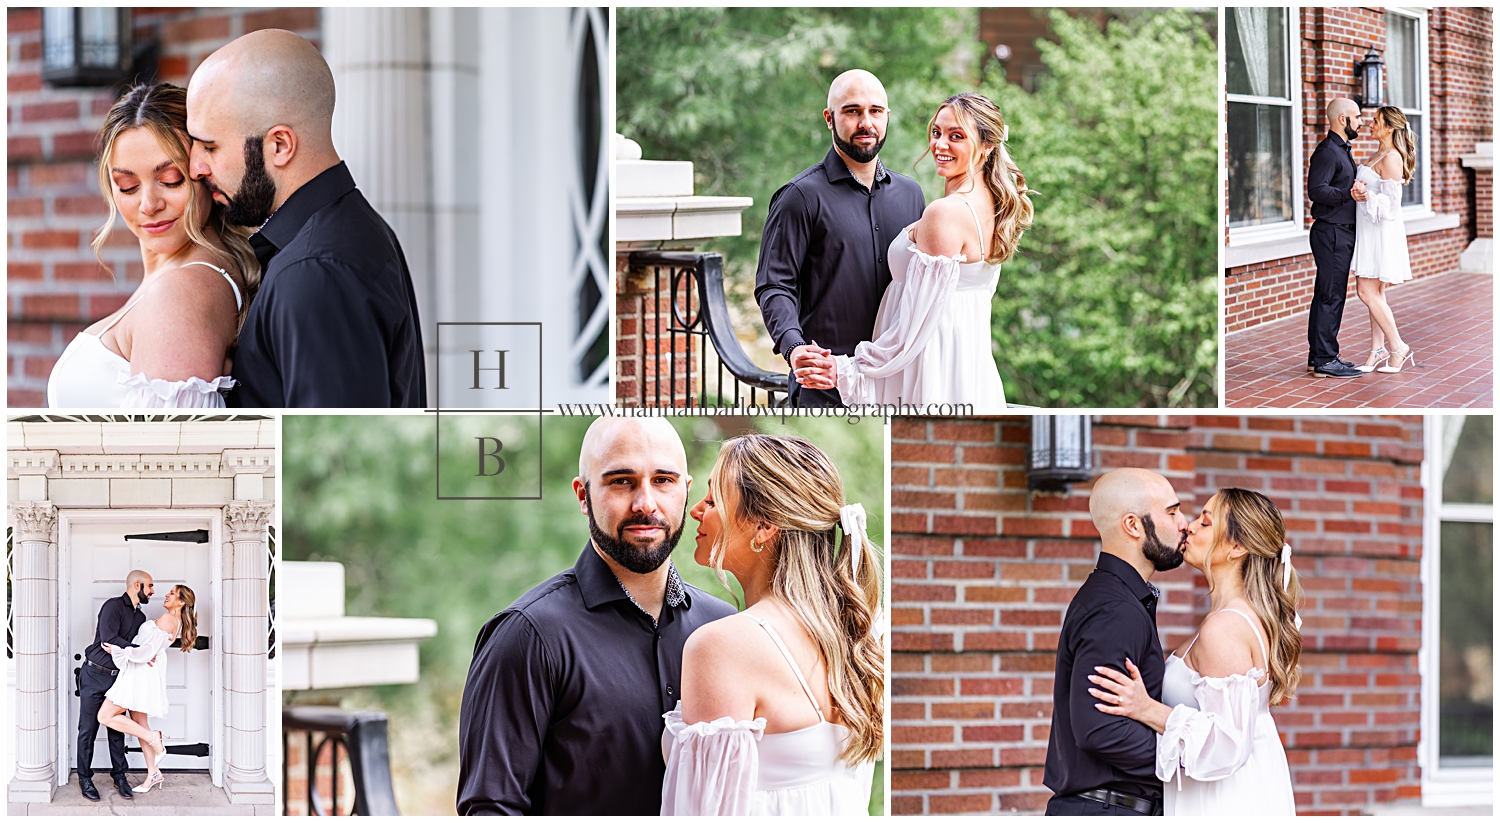 Collage of engagement photos featuring a man in a black suit and woman in a white dress.